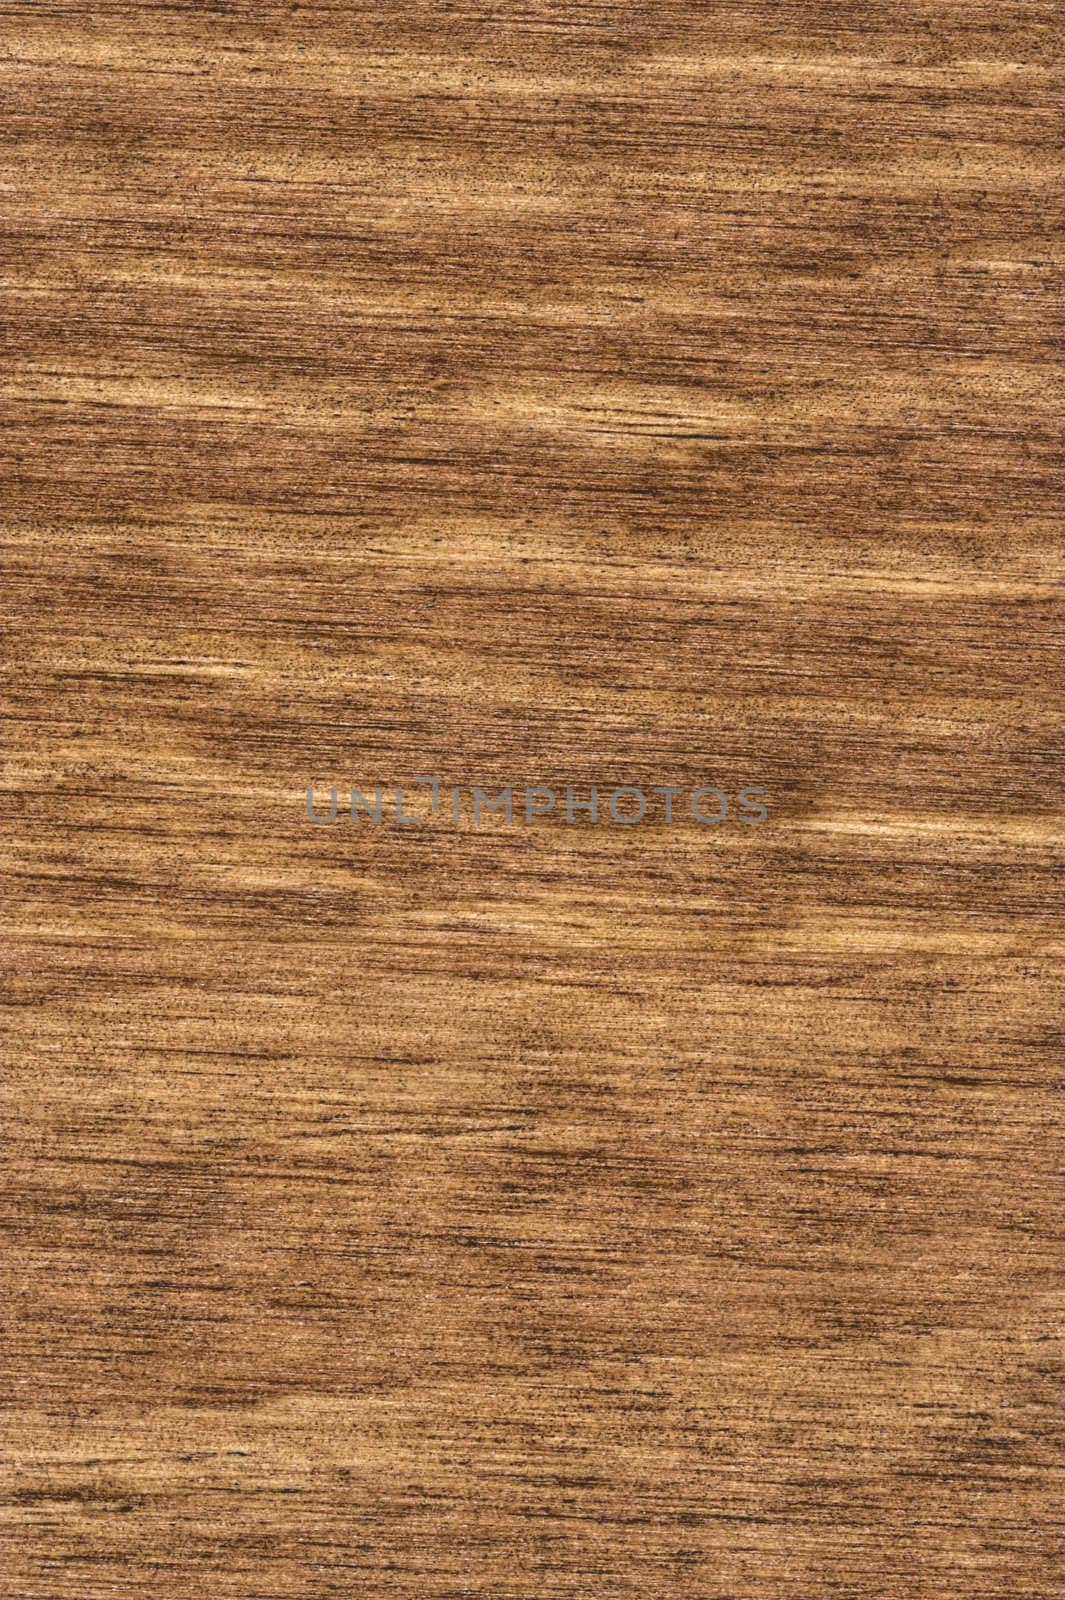 A detailed photo of wood grain. The grain and texture of the wood is very prominent.